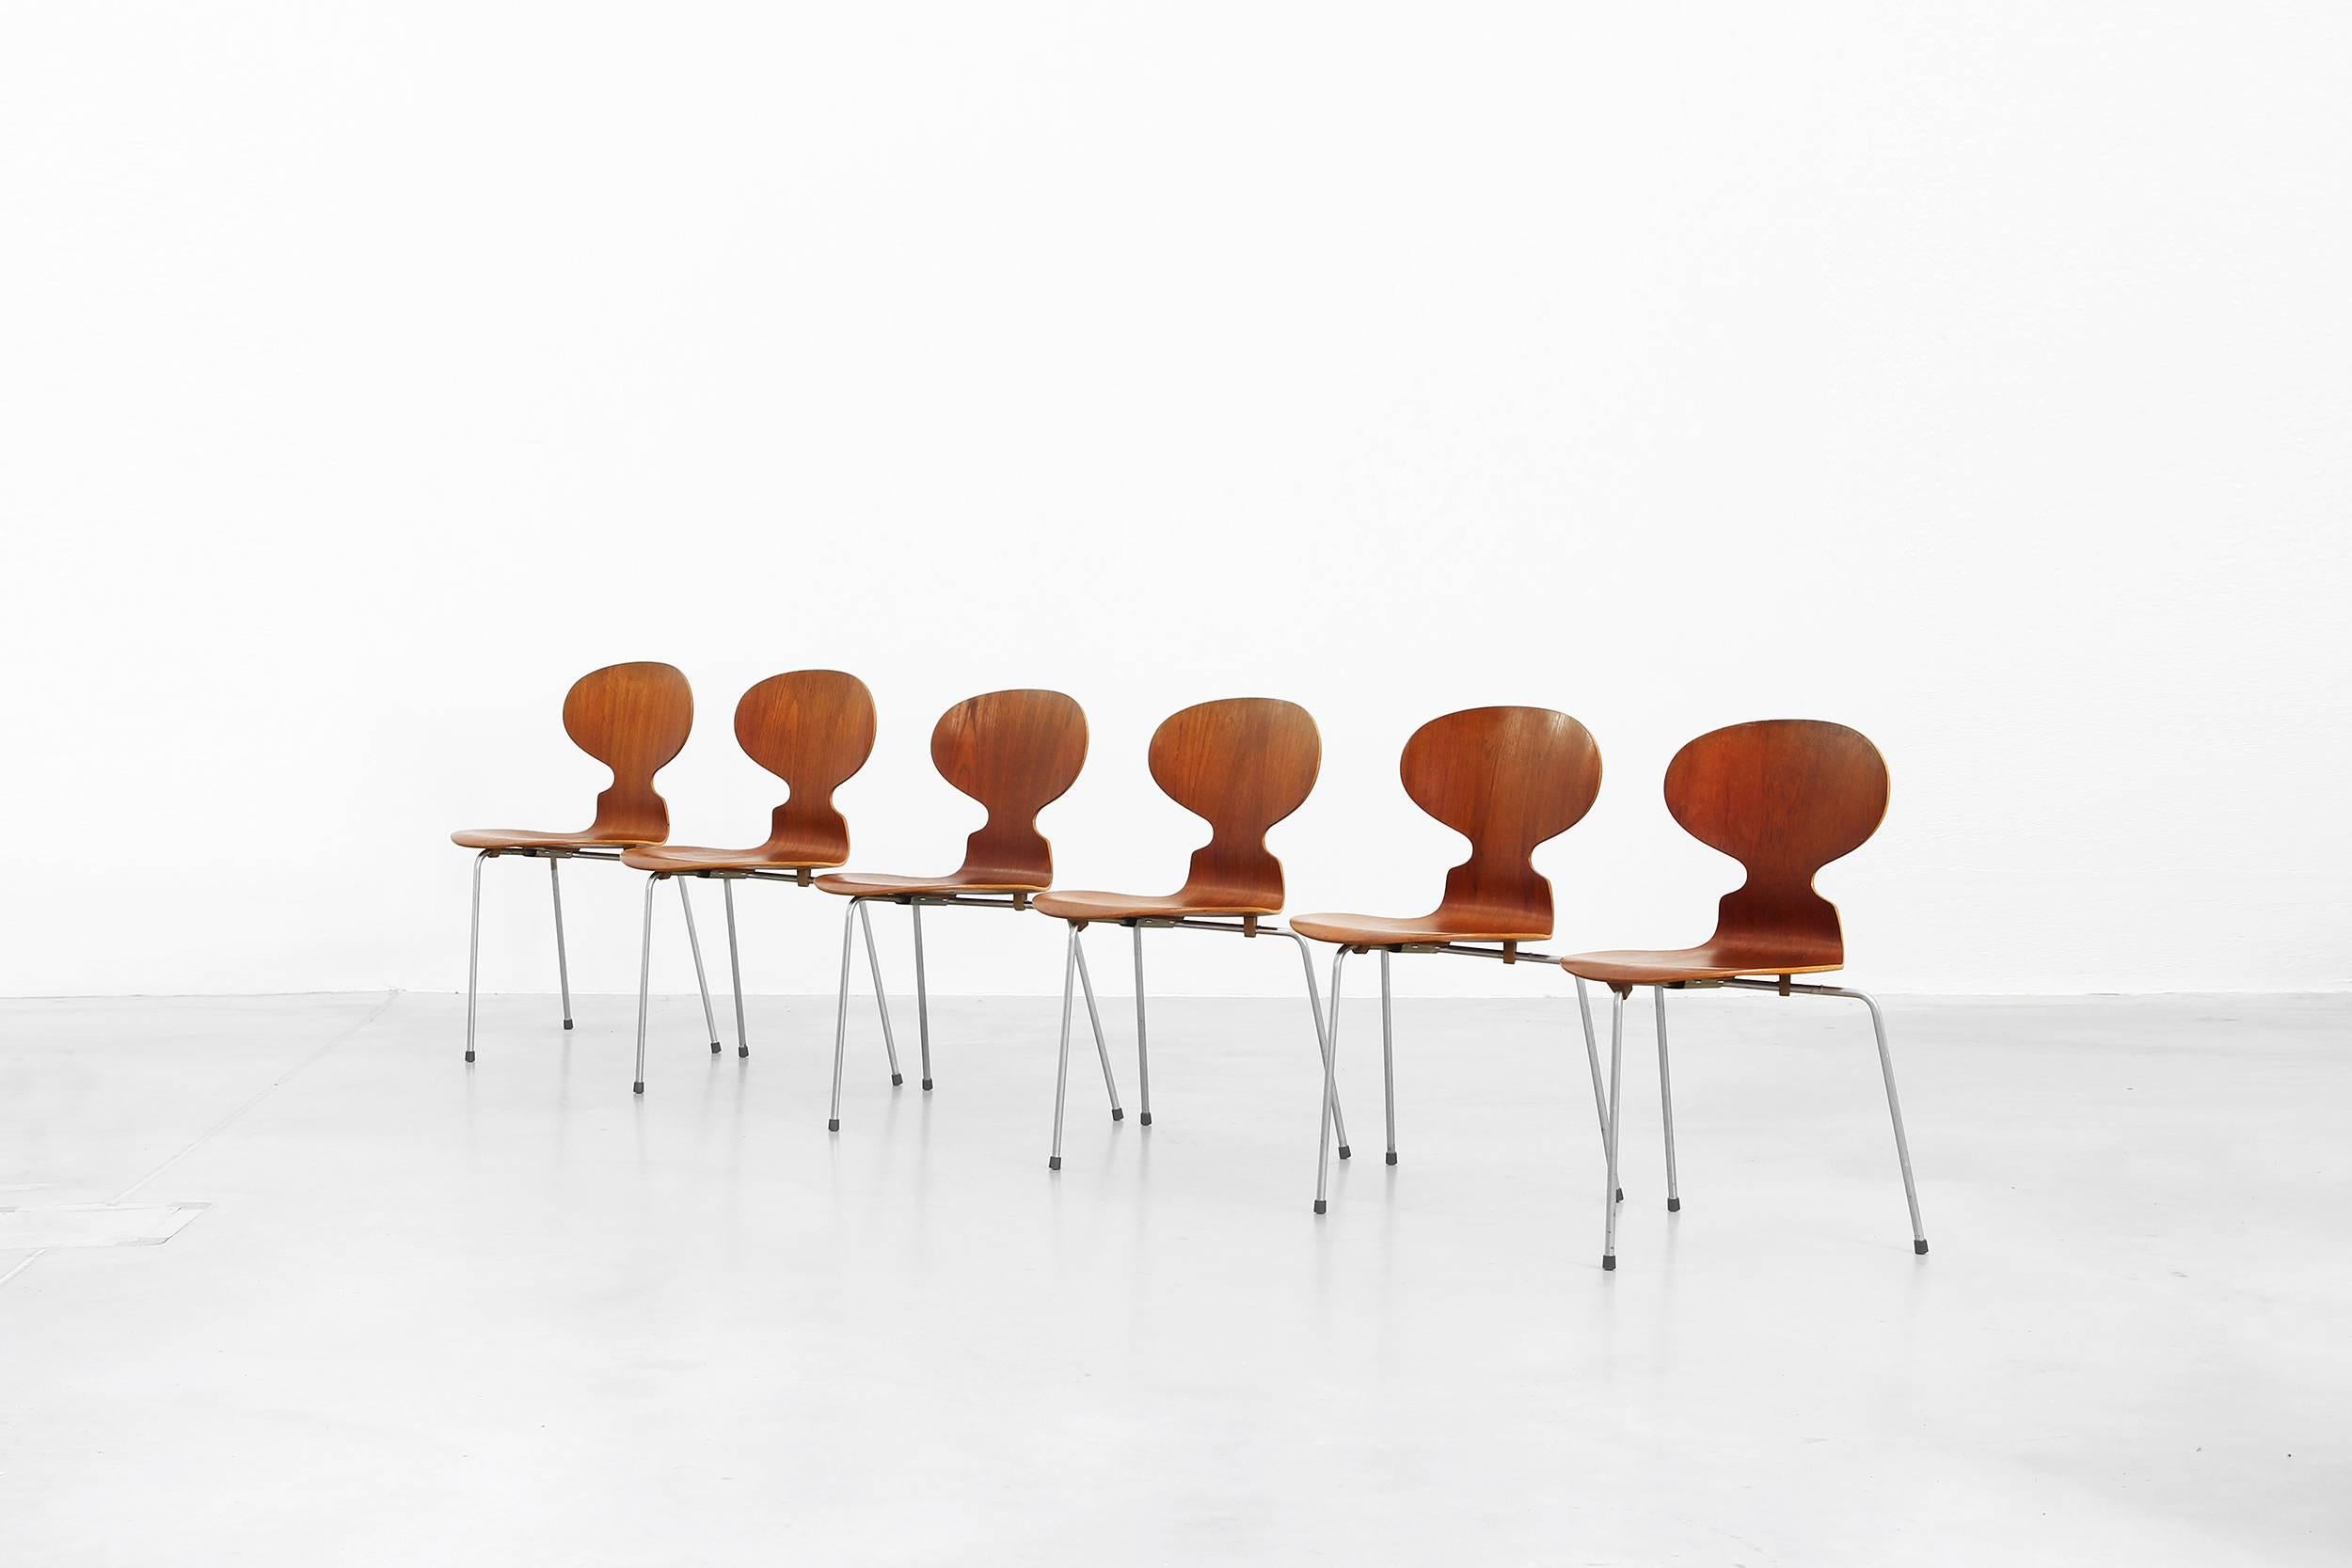 A set of six early ant chairs Mod. 3100 designed by Arne Jacobsen for Fritz Hansen in 1952 made in Denmark. All chairs are made of teak and are all a in good condition with little signs of use, little abrasions, but no harder damages like breaks or